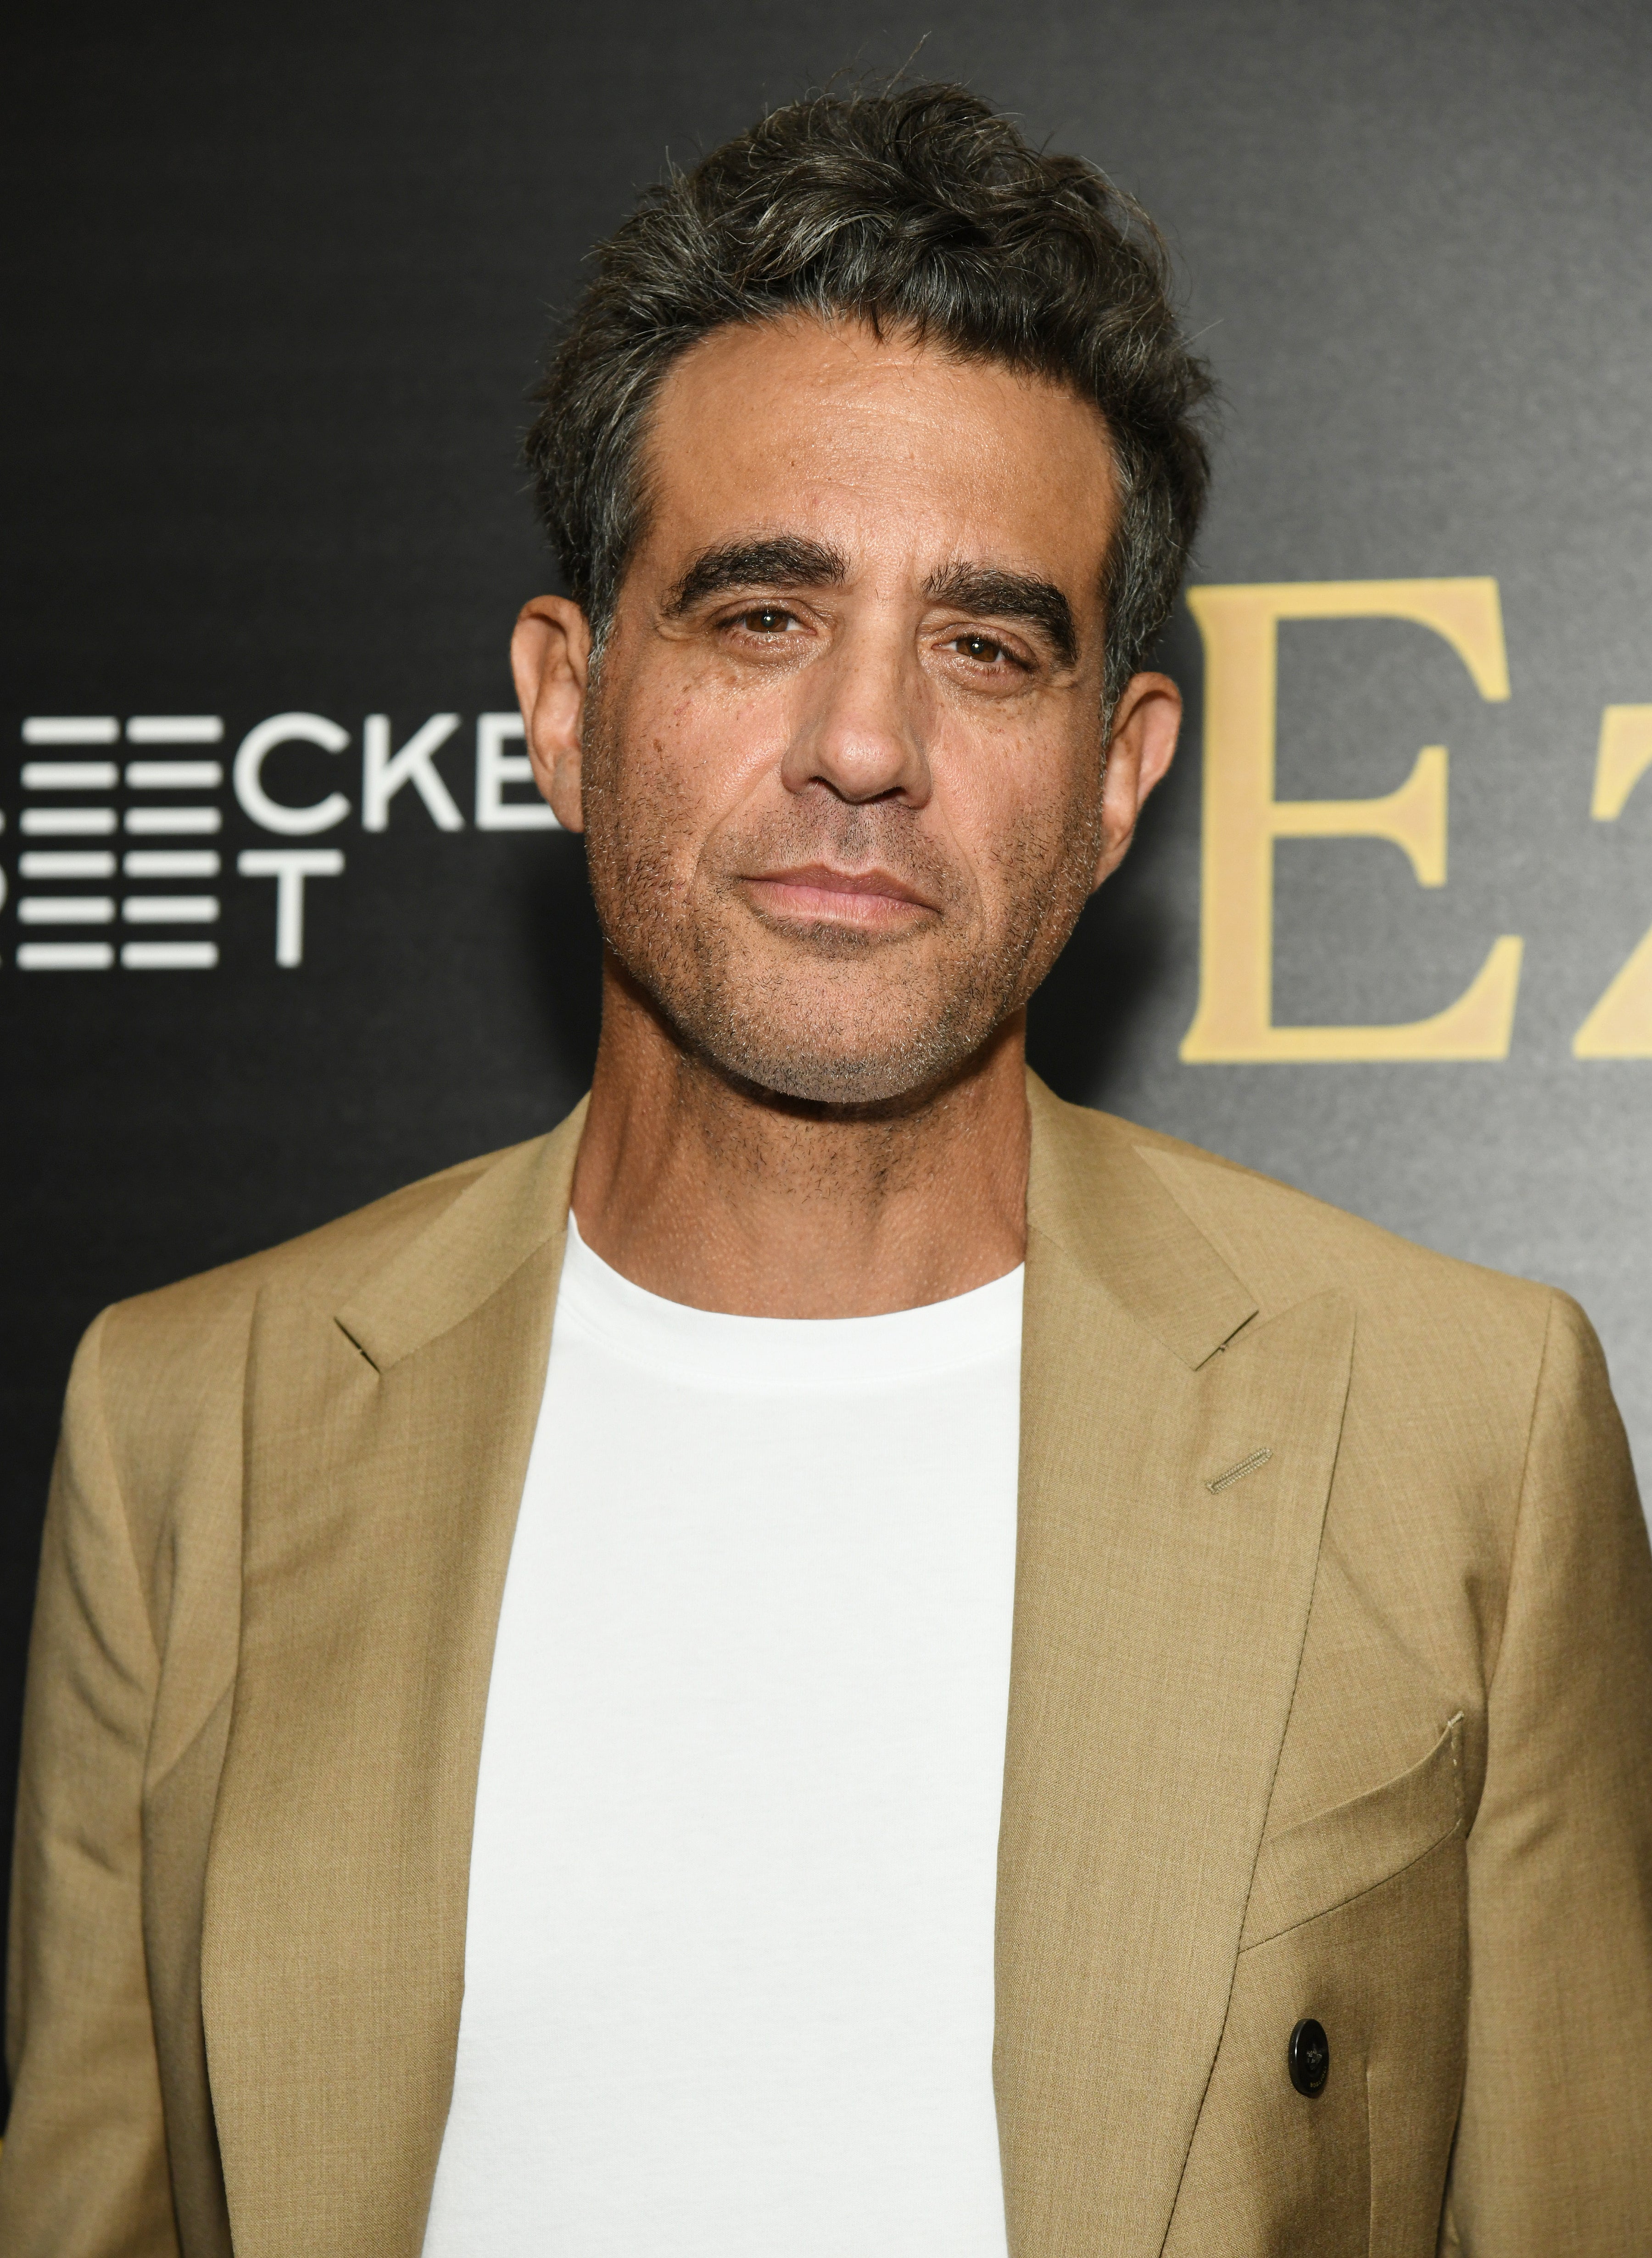 Bobby Cannavale wears a white shirt under a tan blazer at the premiere of &quot;Ezra&quot;